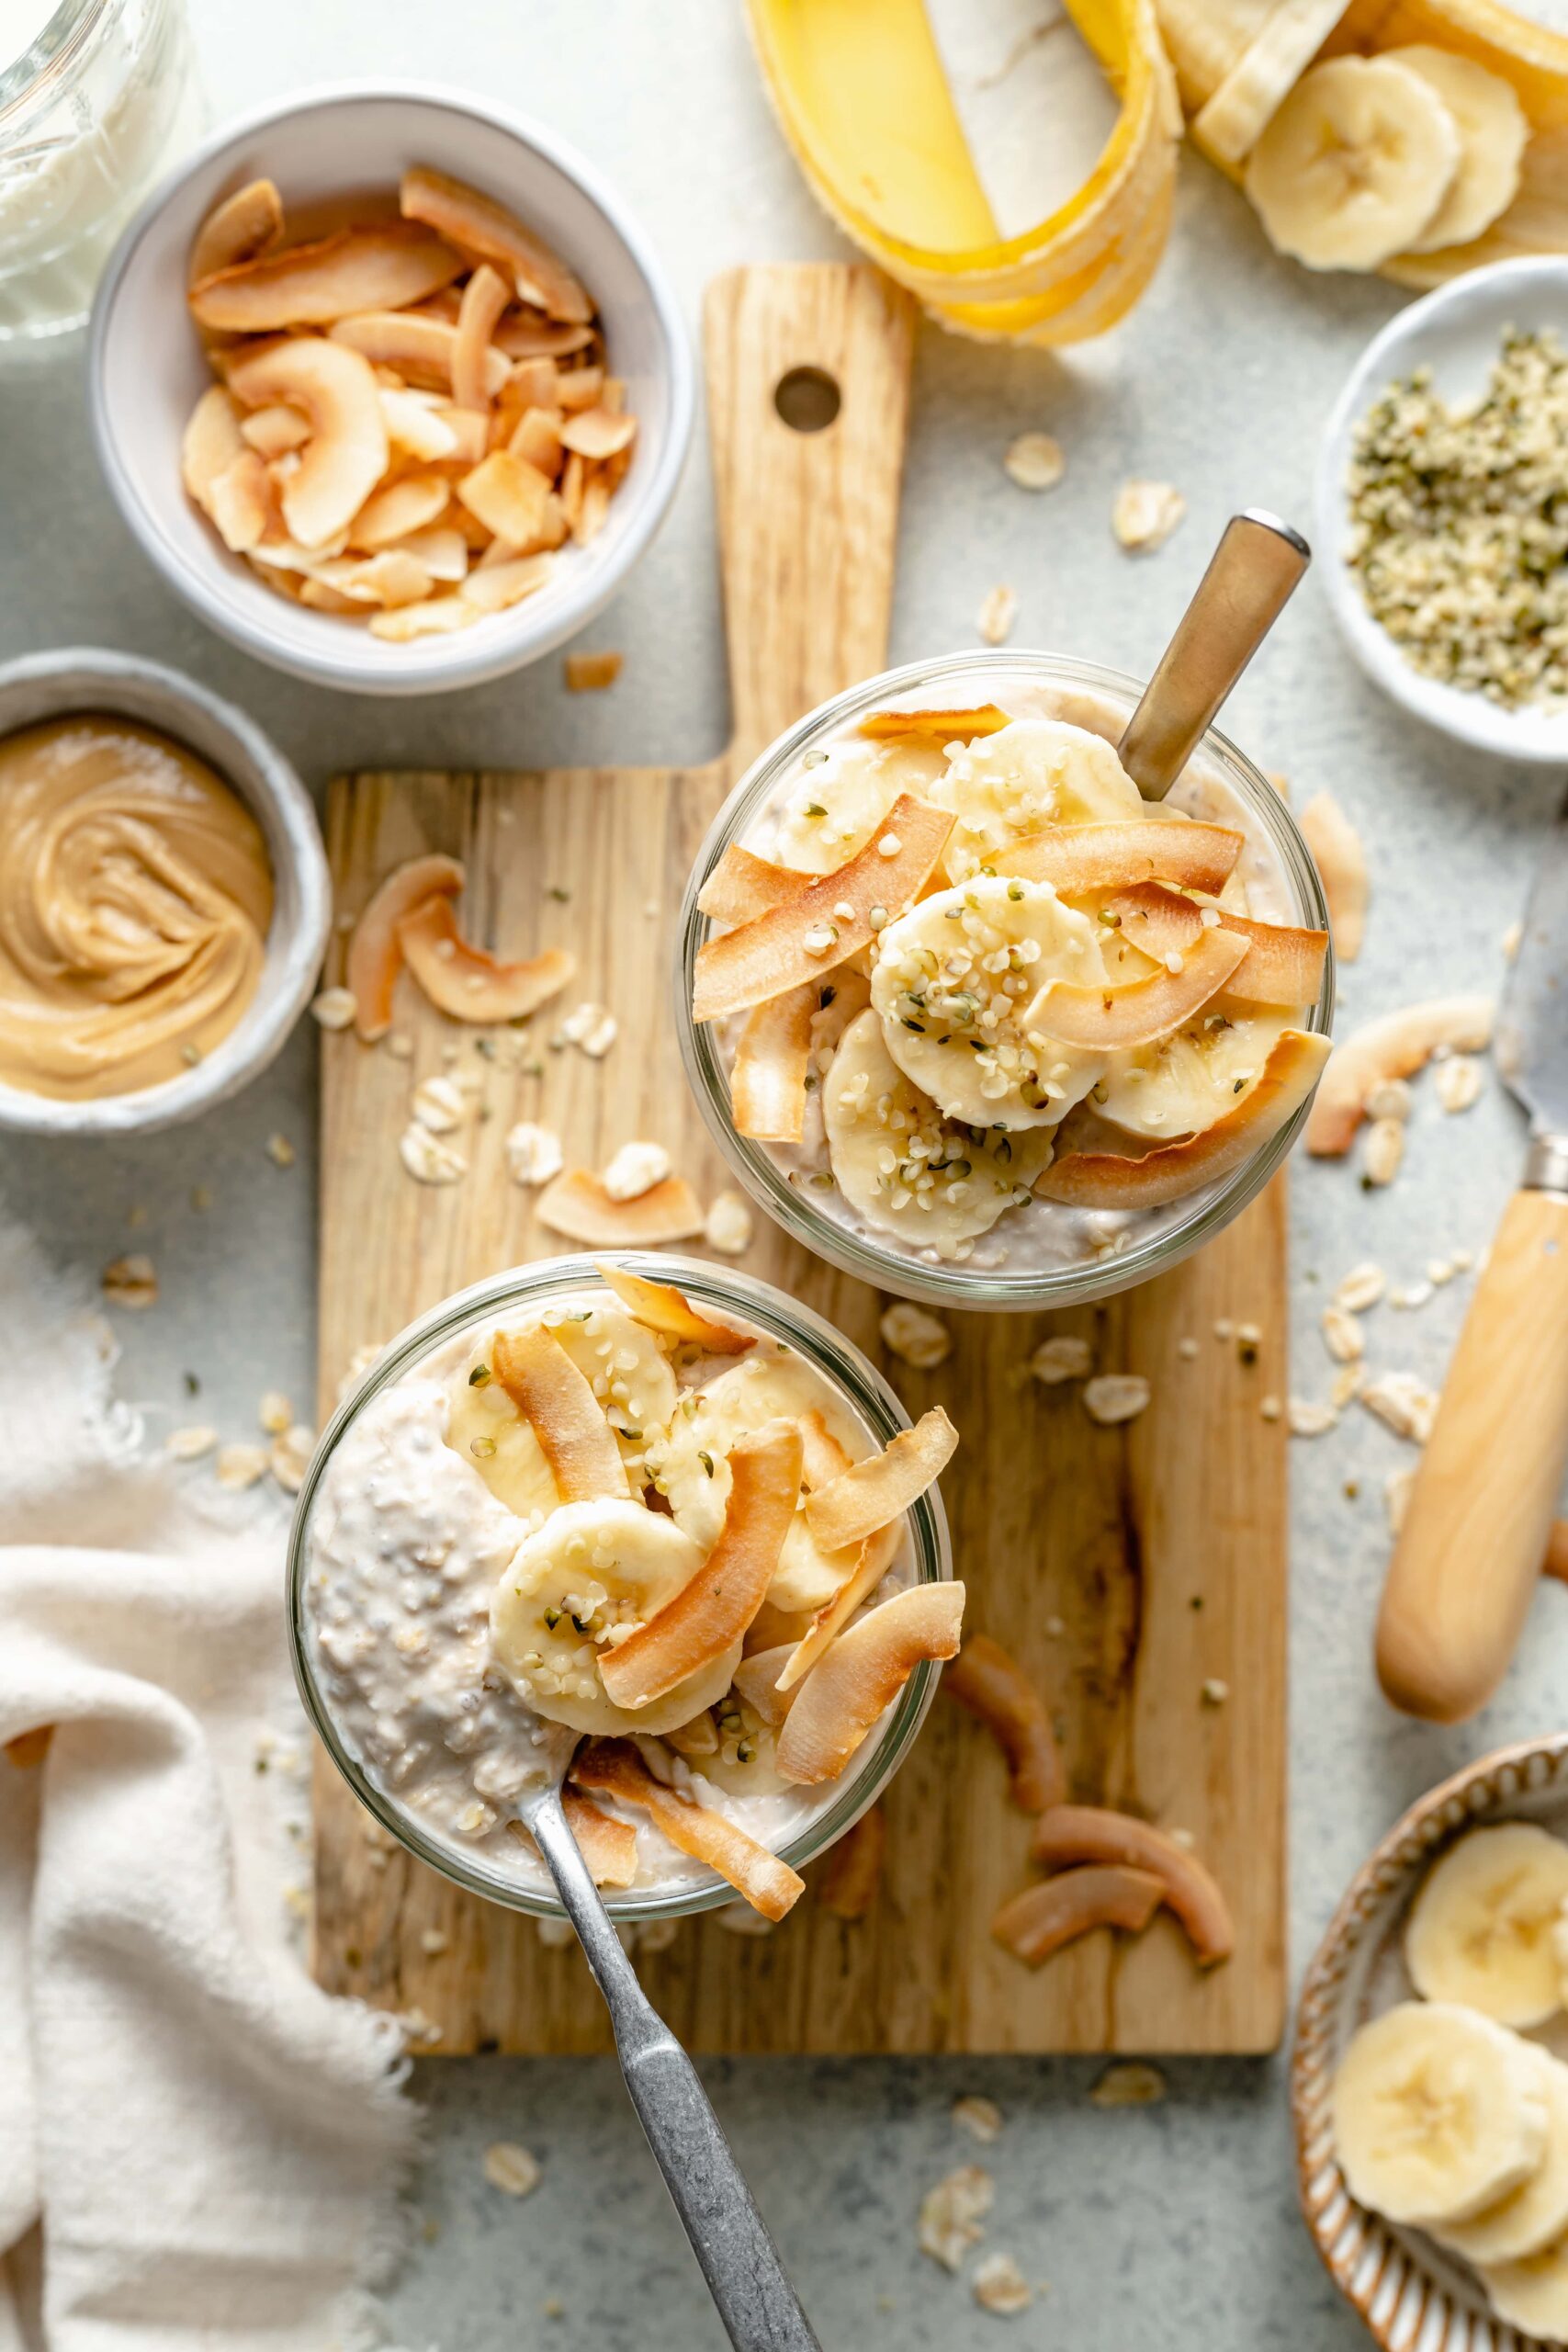 Our Favorite Overnight Oats! ⋆ 100 Days of Real Food